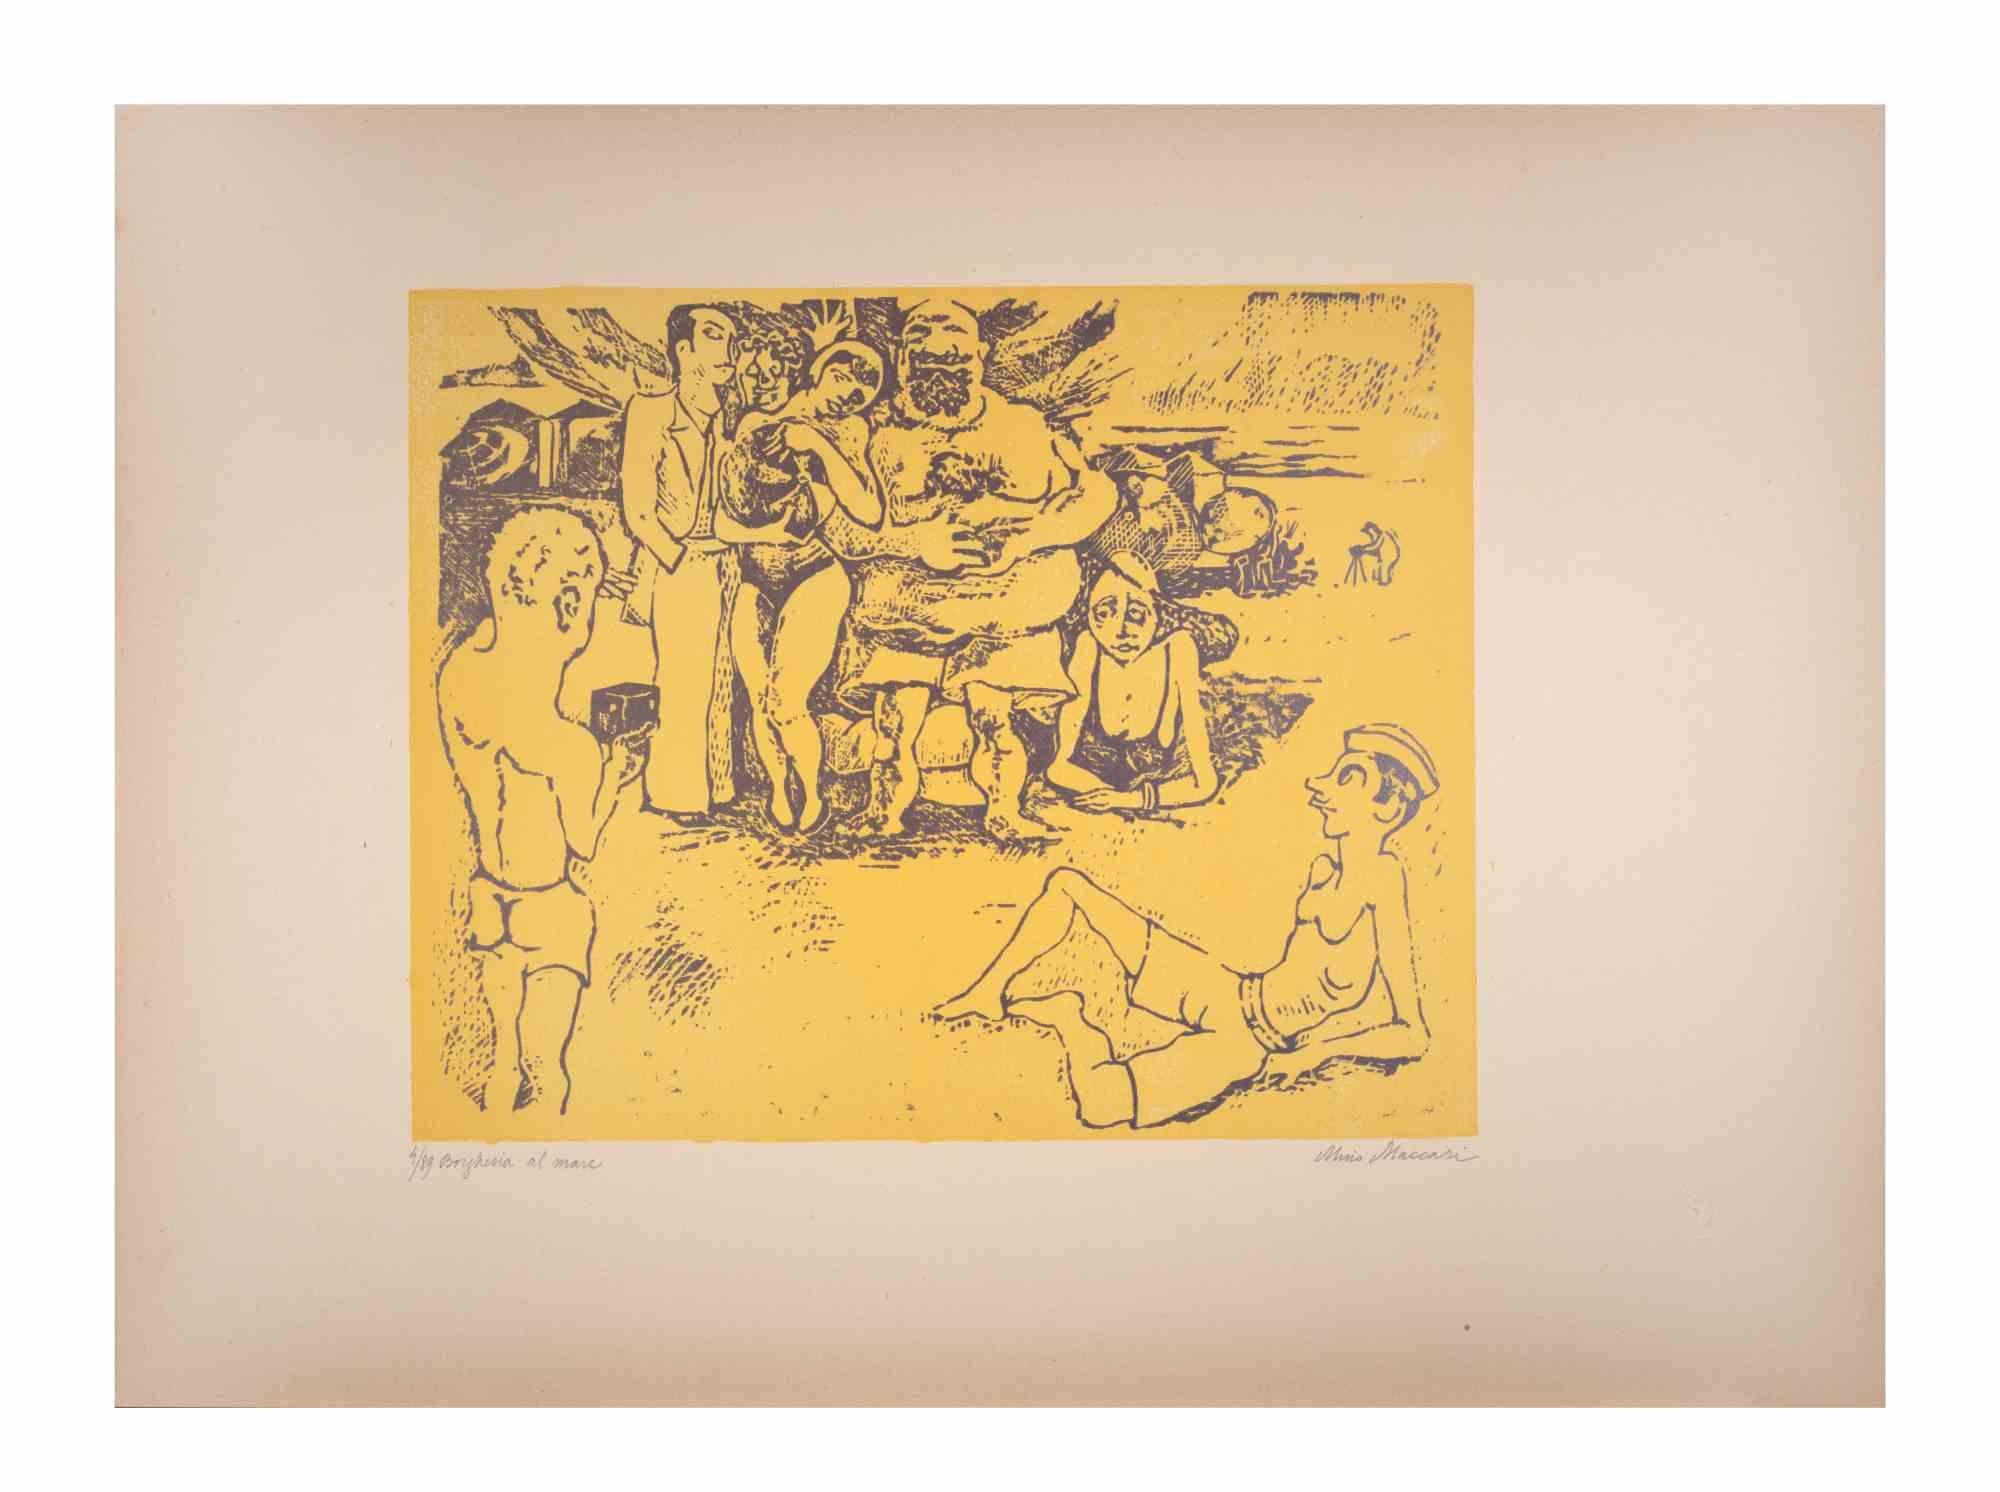 The bourgeoisie at sea is an Artwork realized by Mino Maccari  (1924-1989) in the Mid-20th Century.

Colored woodcut on paper. Hand-signed on the lower, numbered 4/89 specimens and titled on the left margin.

Good conditions.

Mino Maccari (Siena,